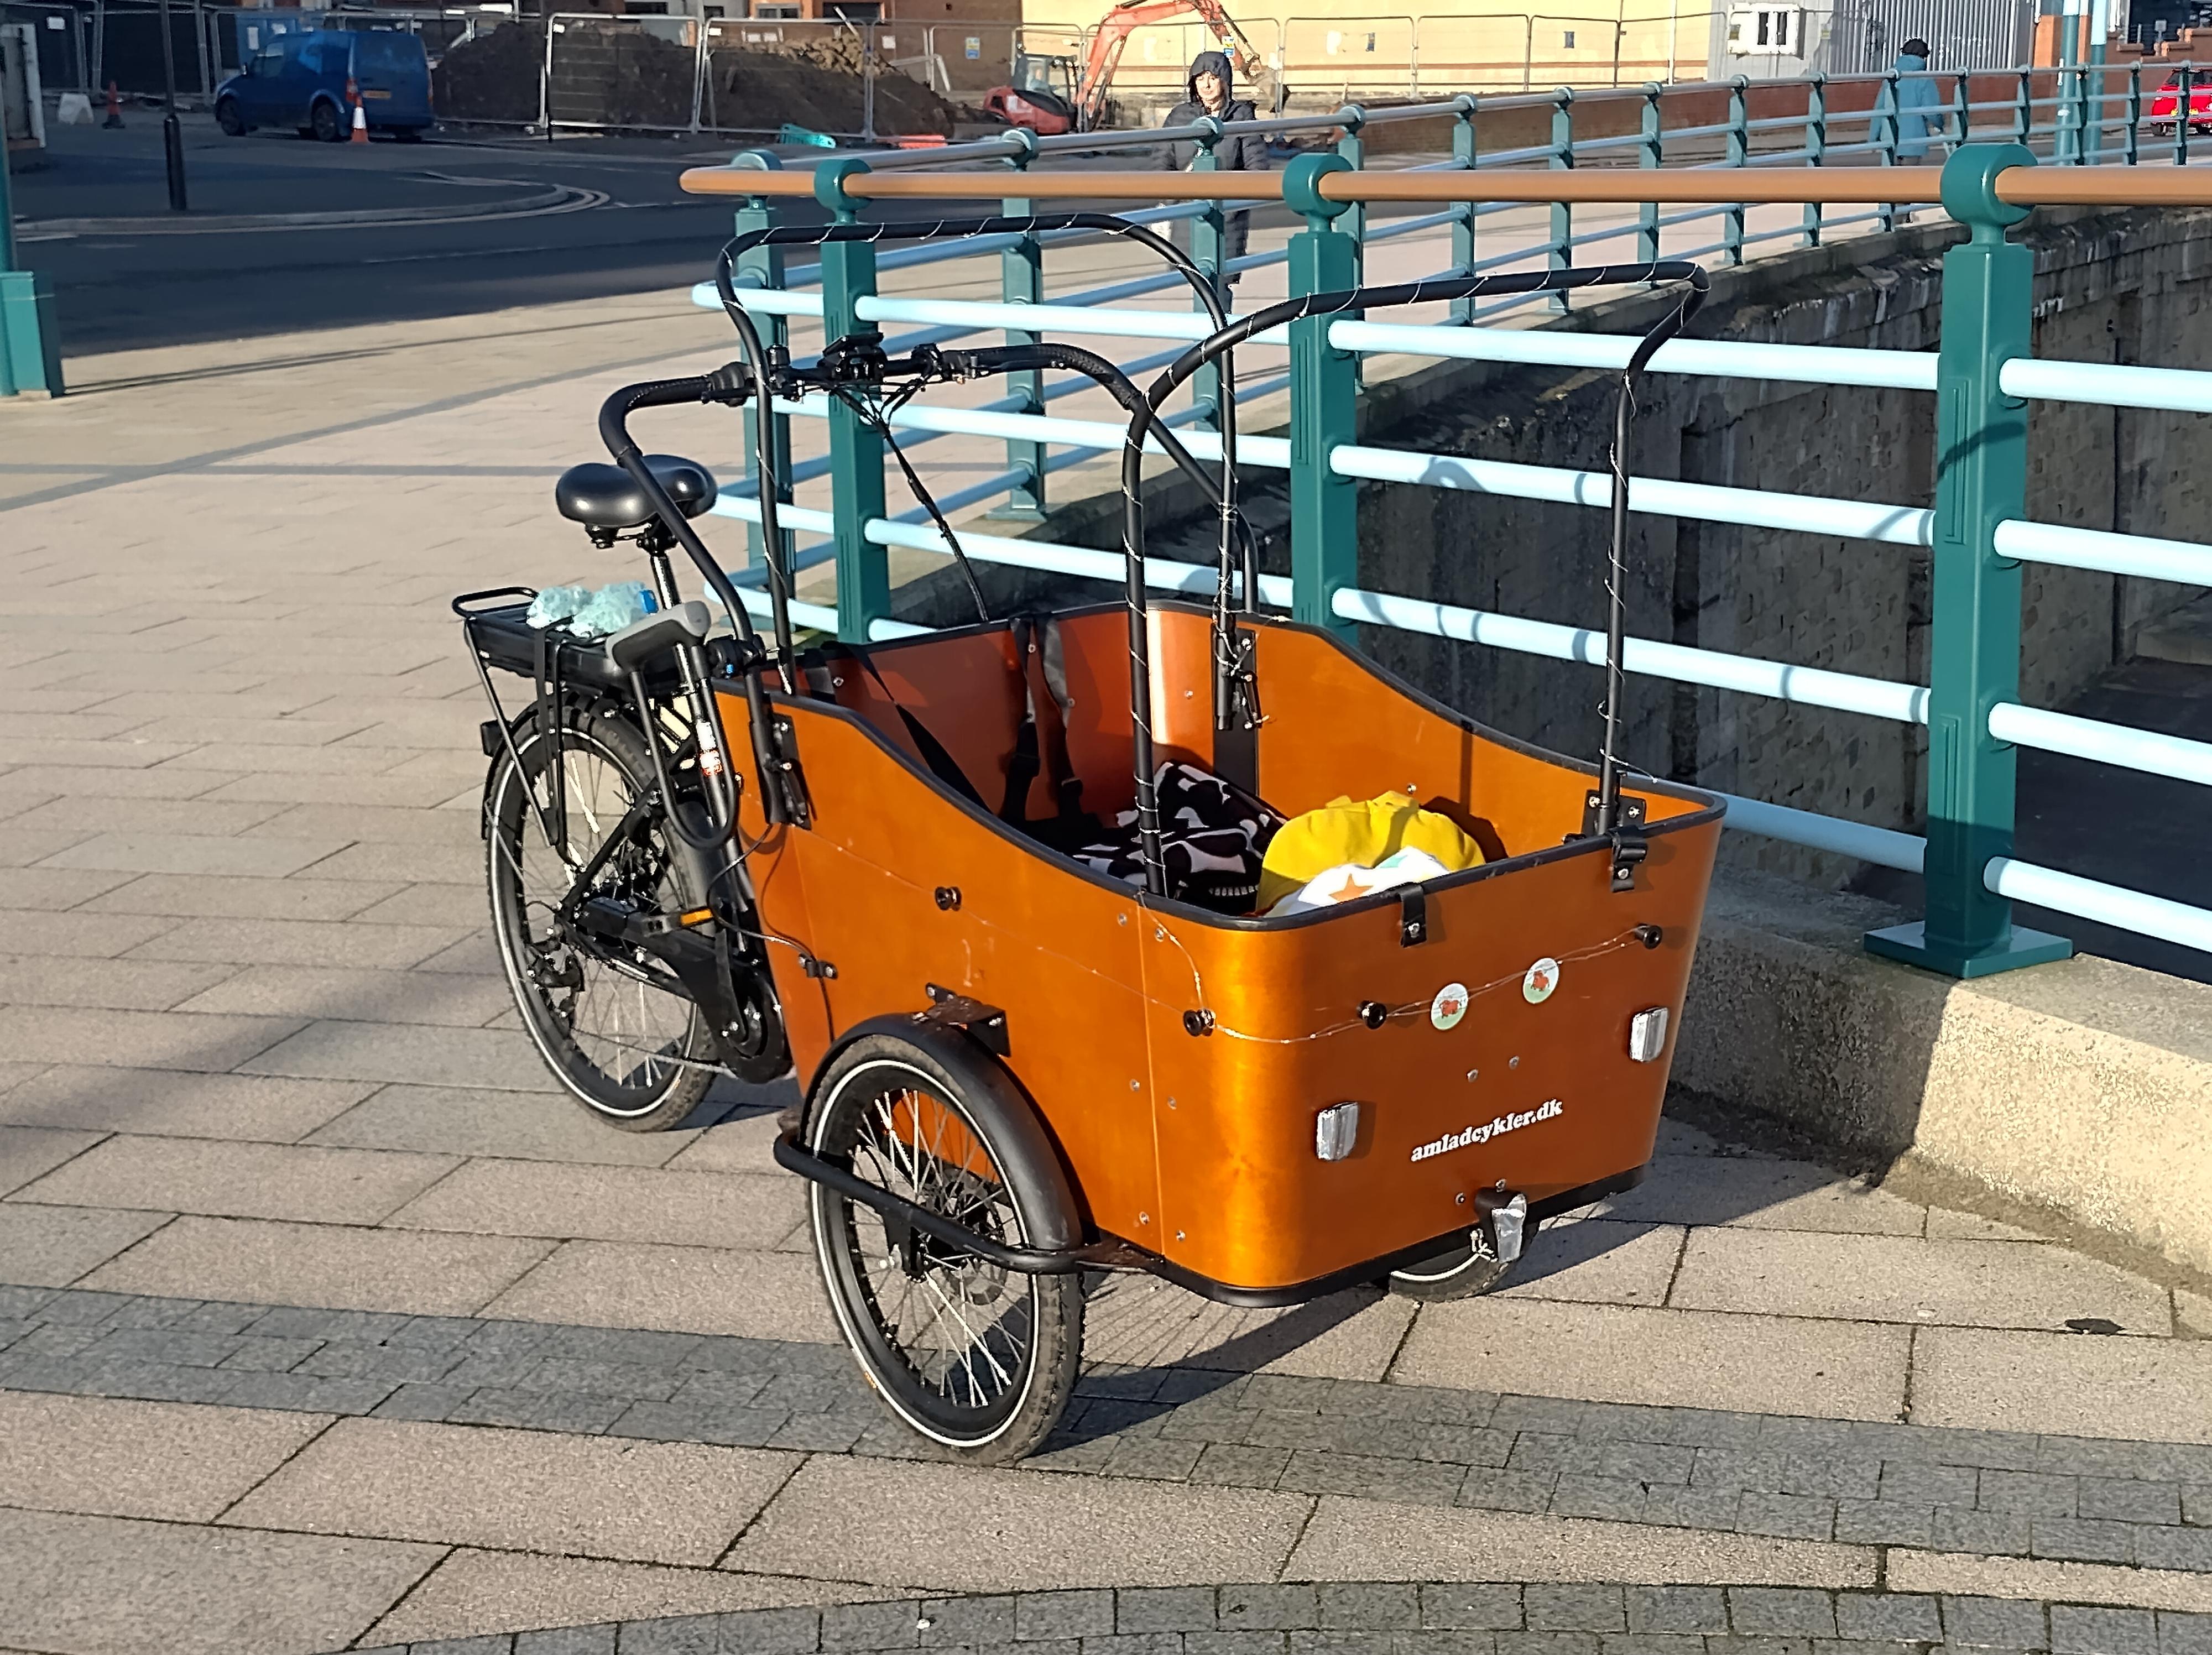 The cargo bike standing on the beach front. It has a large wooden bucket on the front, supported by two wheels. There are poles for the roof, and a handlebar like a pram handle. The back half is like a normal bike.